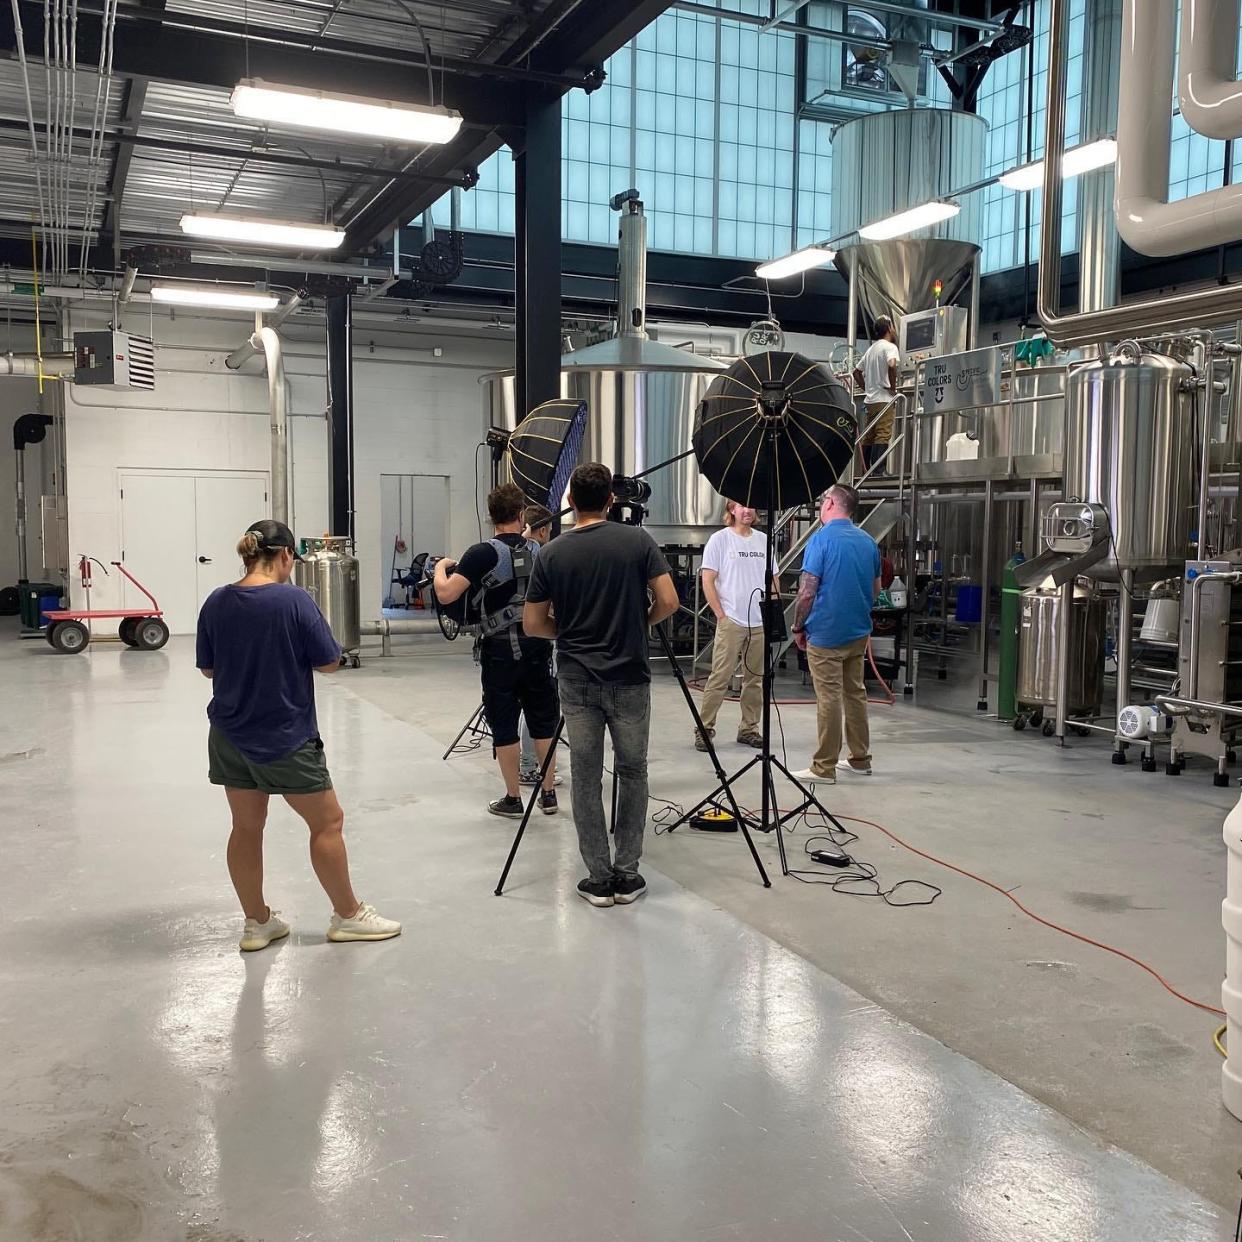 The docuseries START UP is in Wilmington, filming at local breweries, distilleries and coffee shops for its upcoming season.